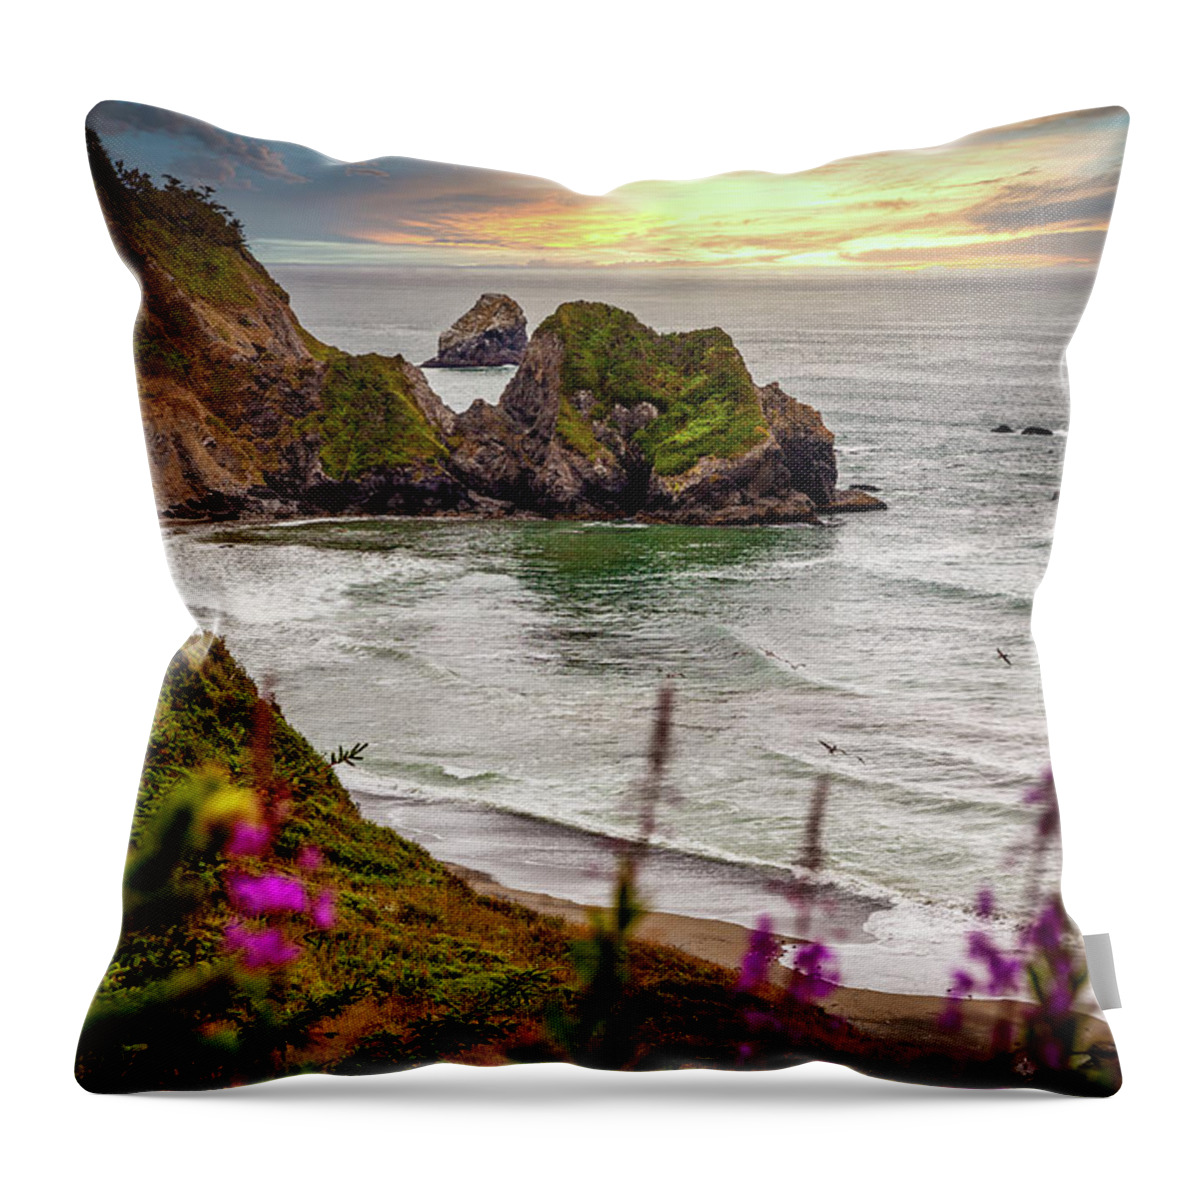 California Throw Pillow featuring the photograph Northern California Sunset by Bradley Morris